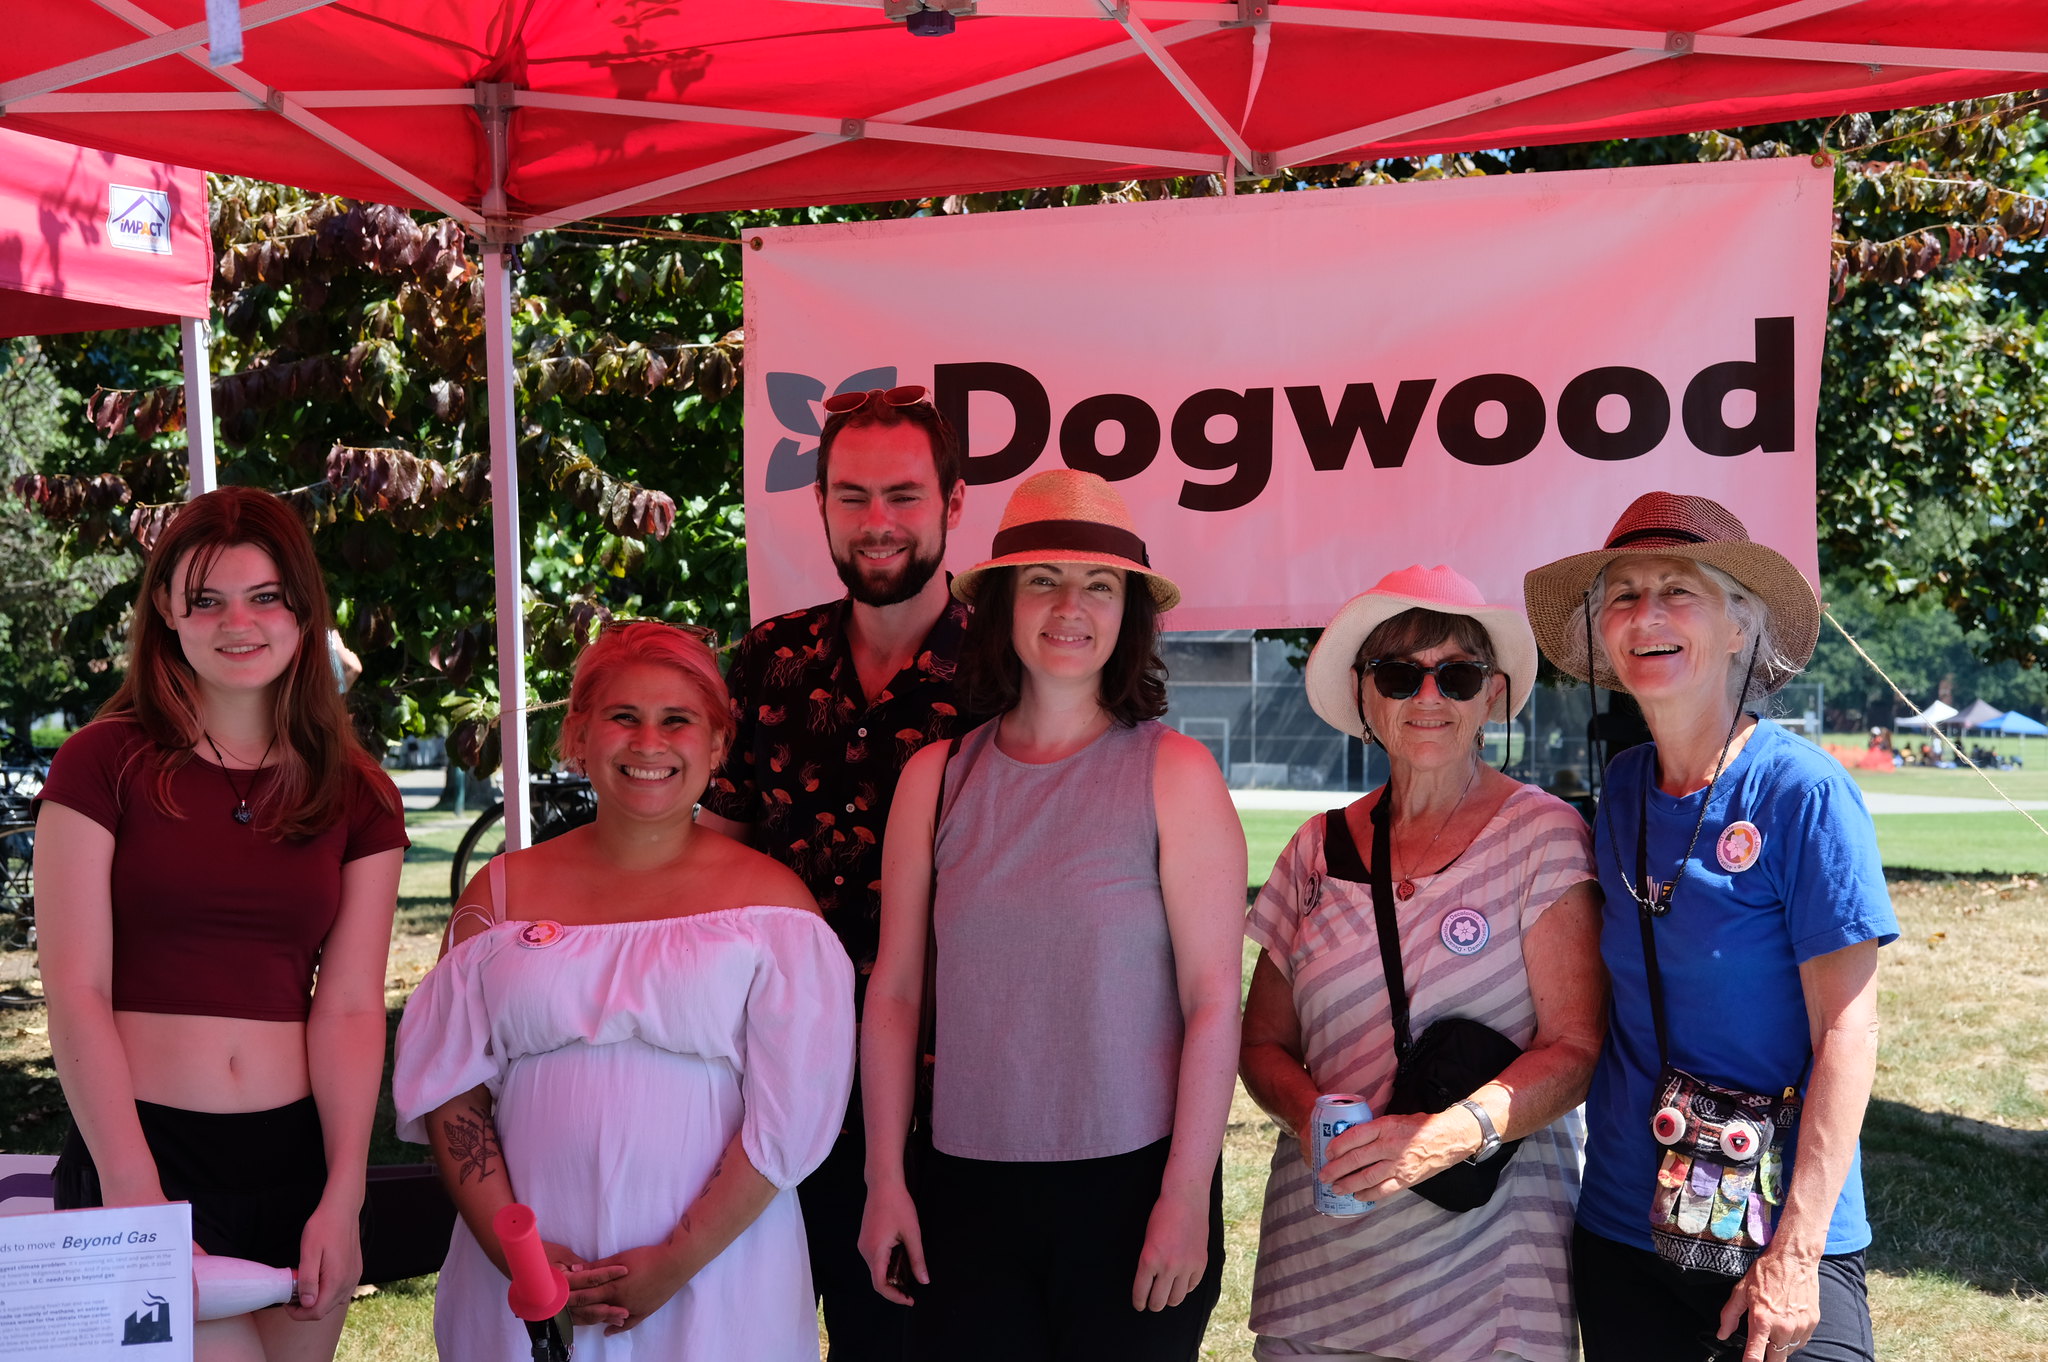 Group of six people smiling for the camera in front of hung banner that reads 'Dogwood' under a pop up tent with trees in the background.